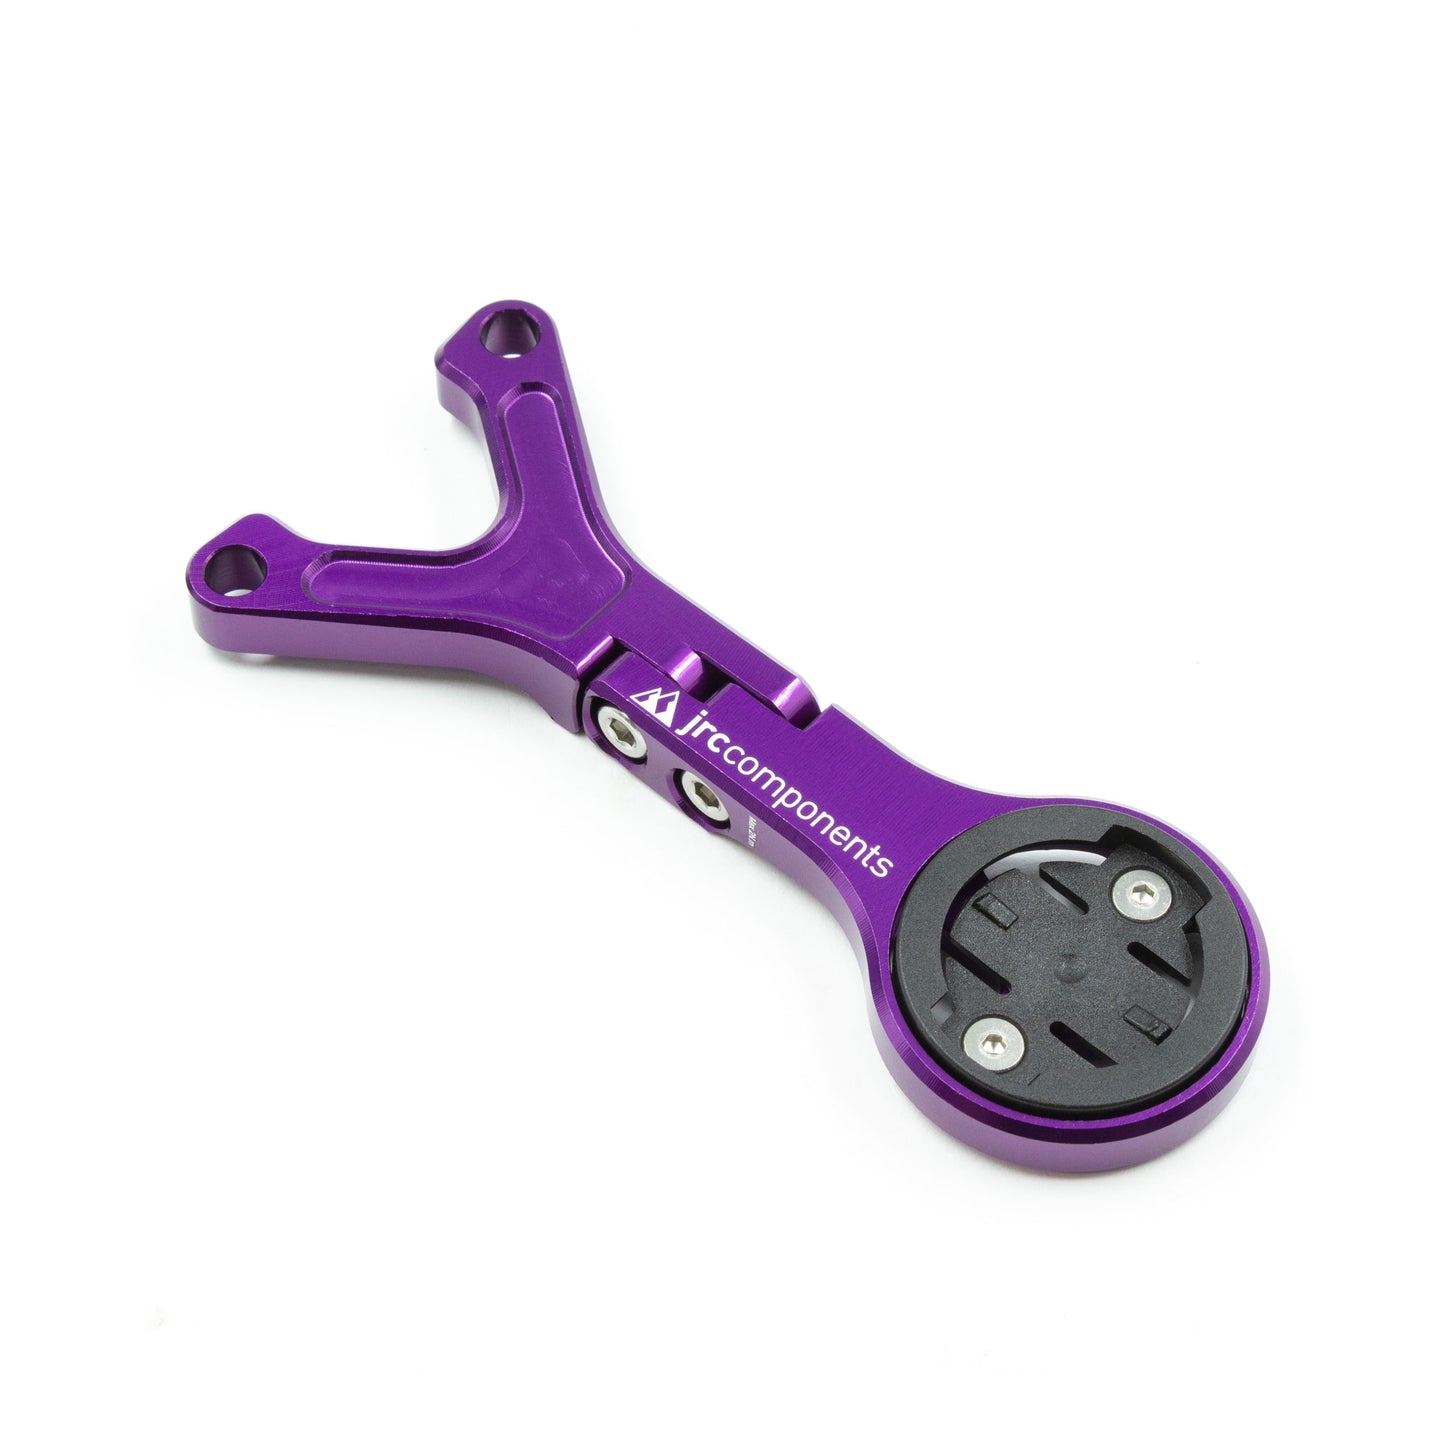 JRC Components, Lightweight Underbar Out Front Mount GPS Computer Mount for Cannondale Hollowgram Knot and Save Handlebar and Stem System for Wahoo in Purple